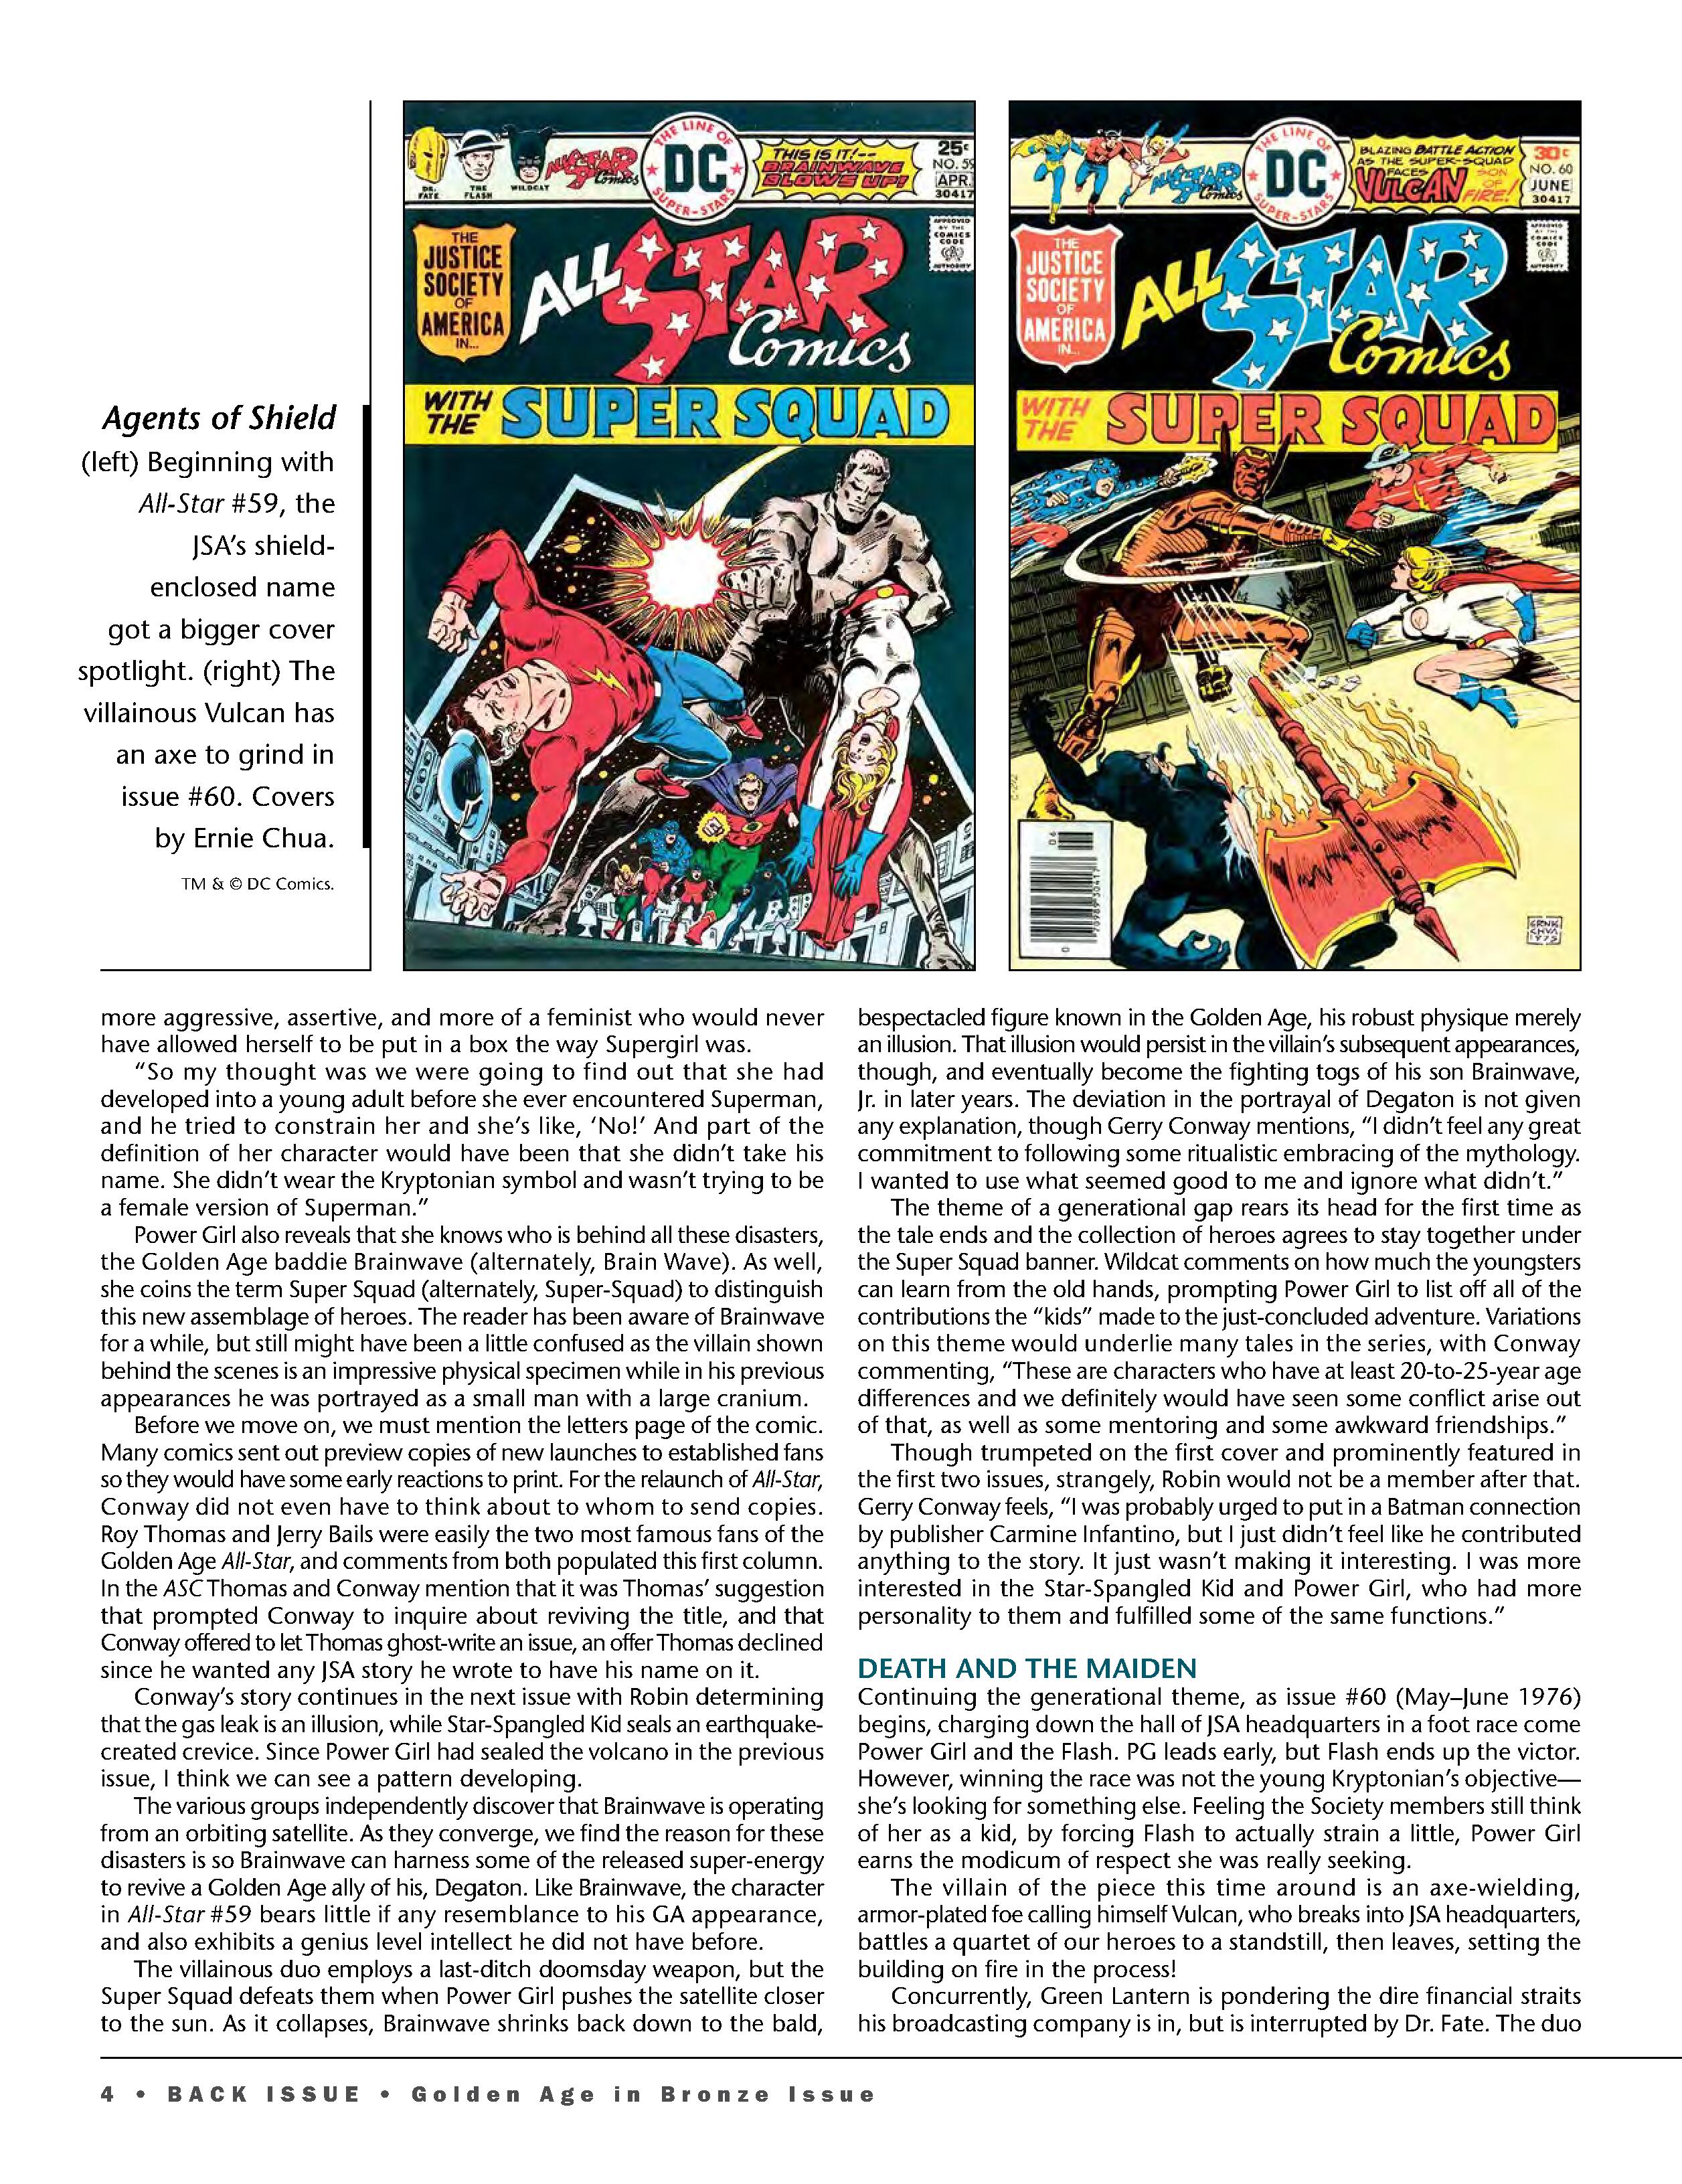 Read online Back Issue comic -  Issue #106 - 6